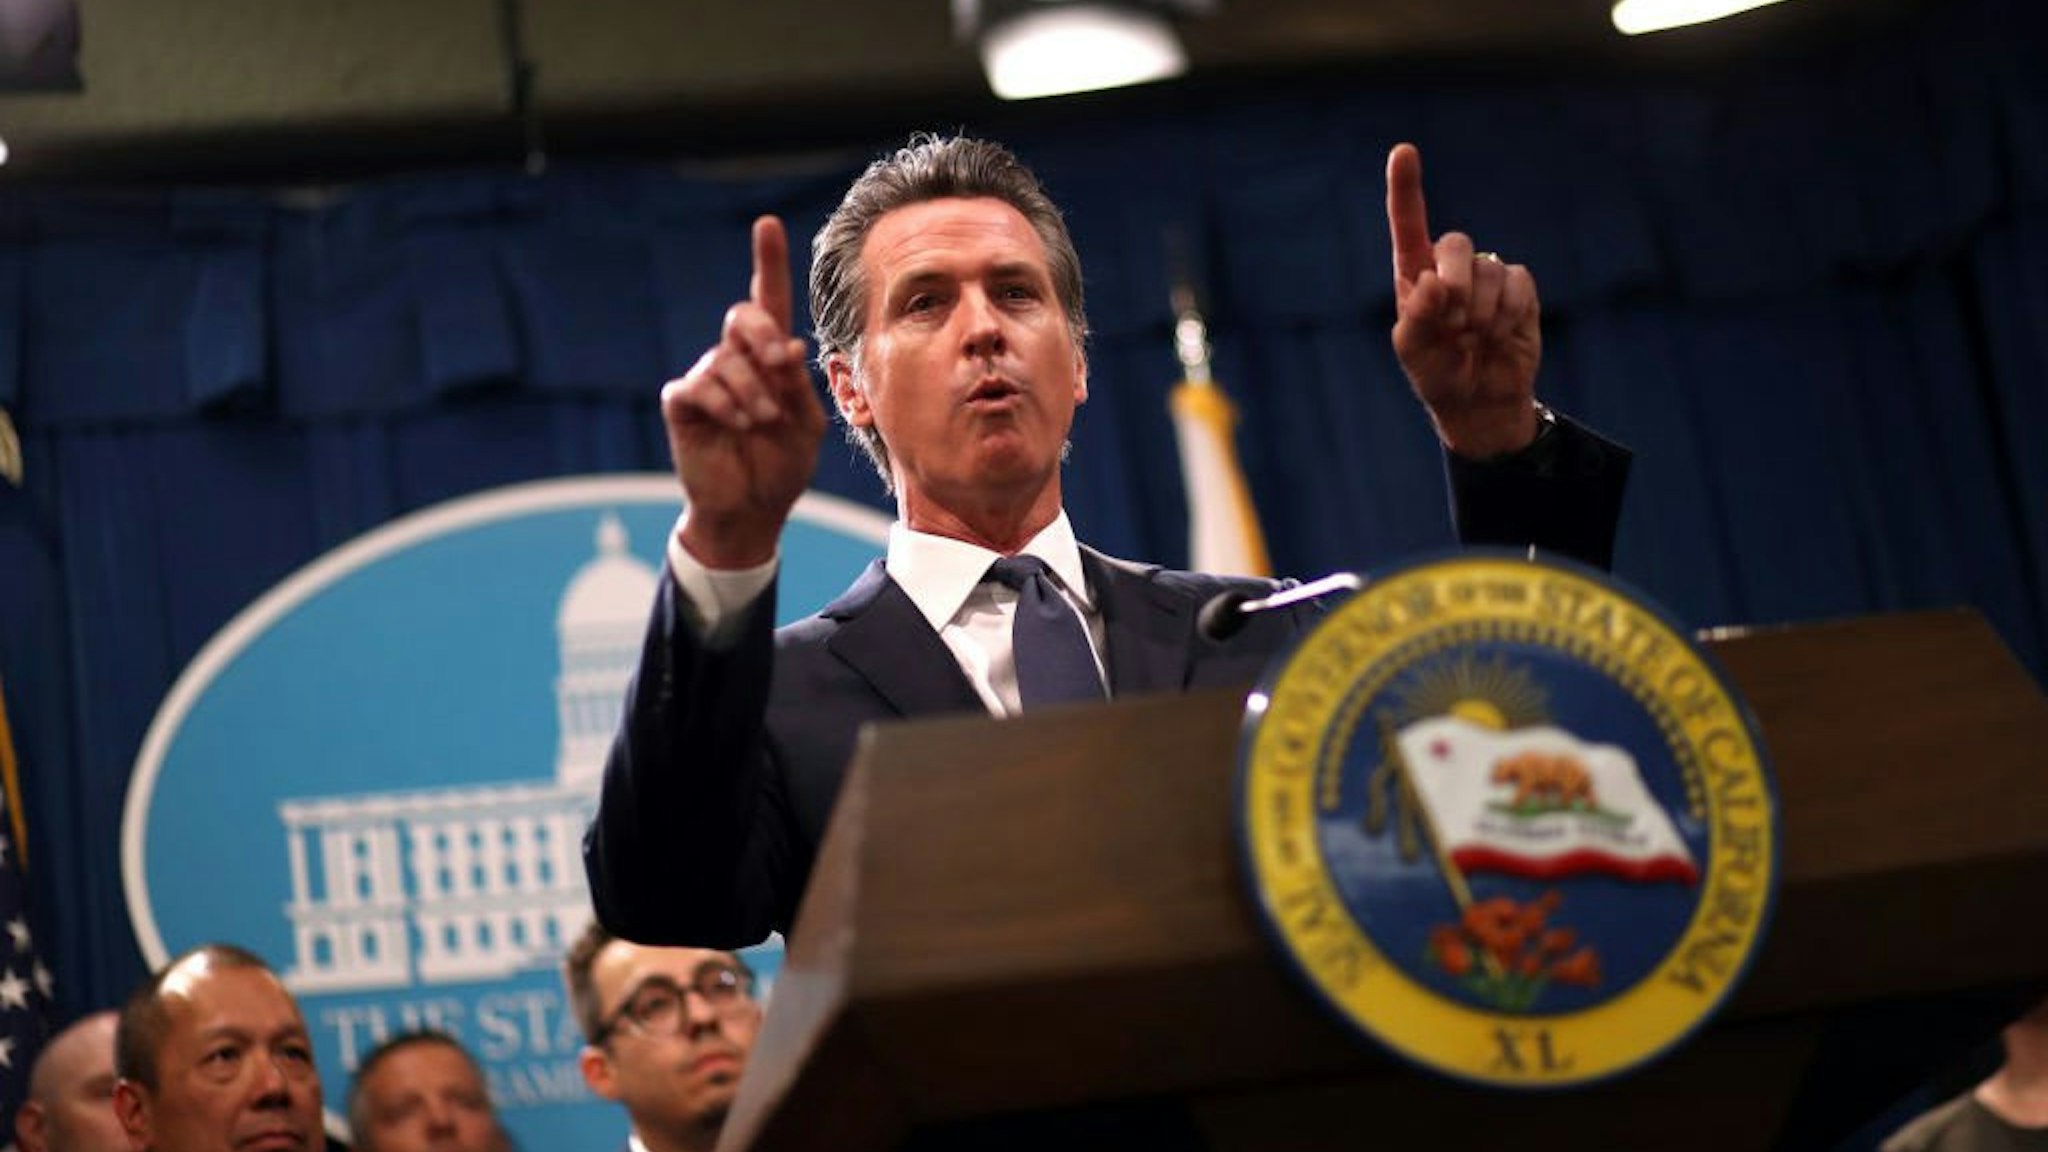 California Gov. Gavin Newsom speaks during a news conference with California attorney General Xavier Becerra at the California State Capitol on August 16, 2019 in Sacramento, California.